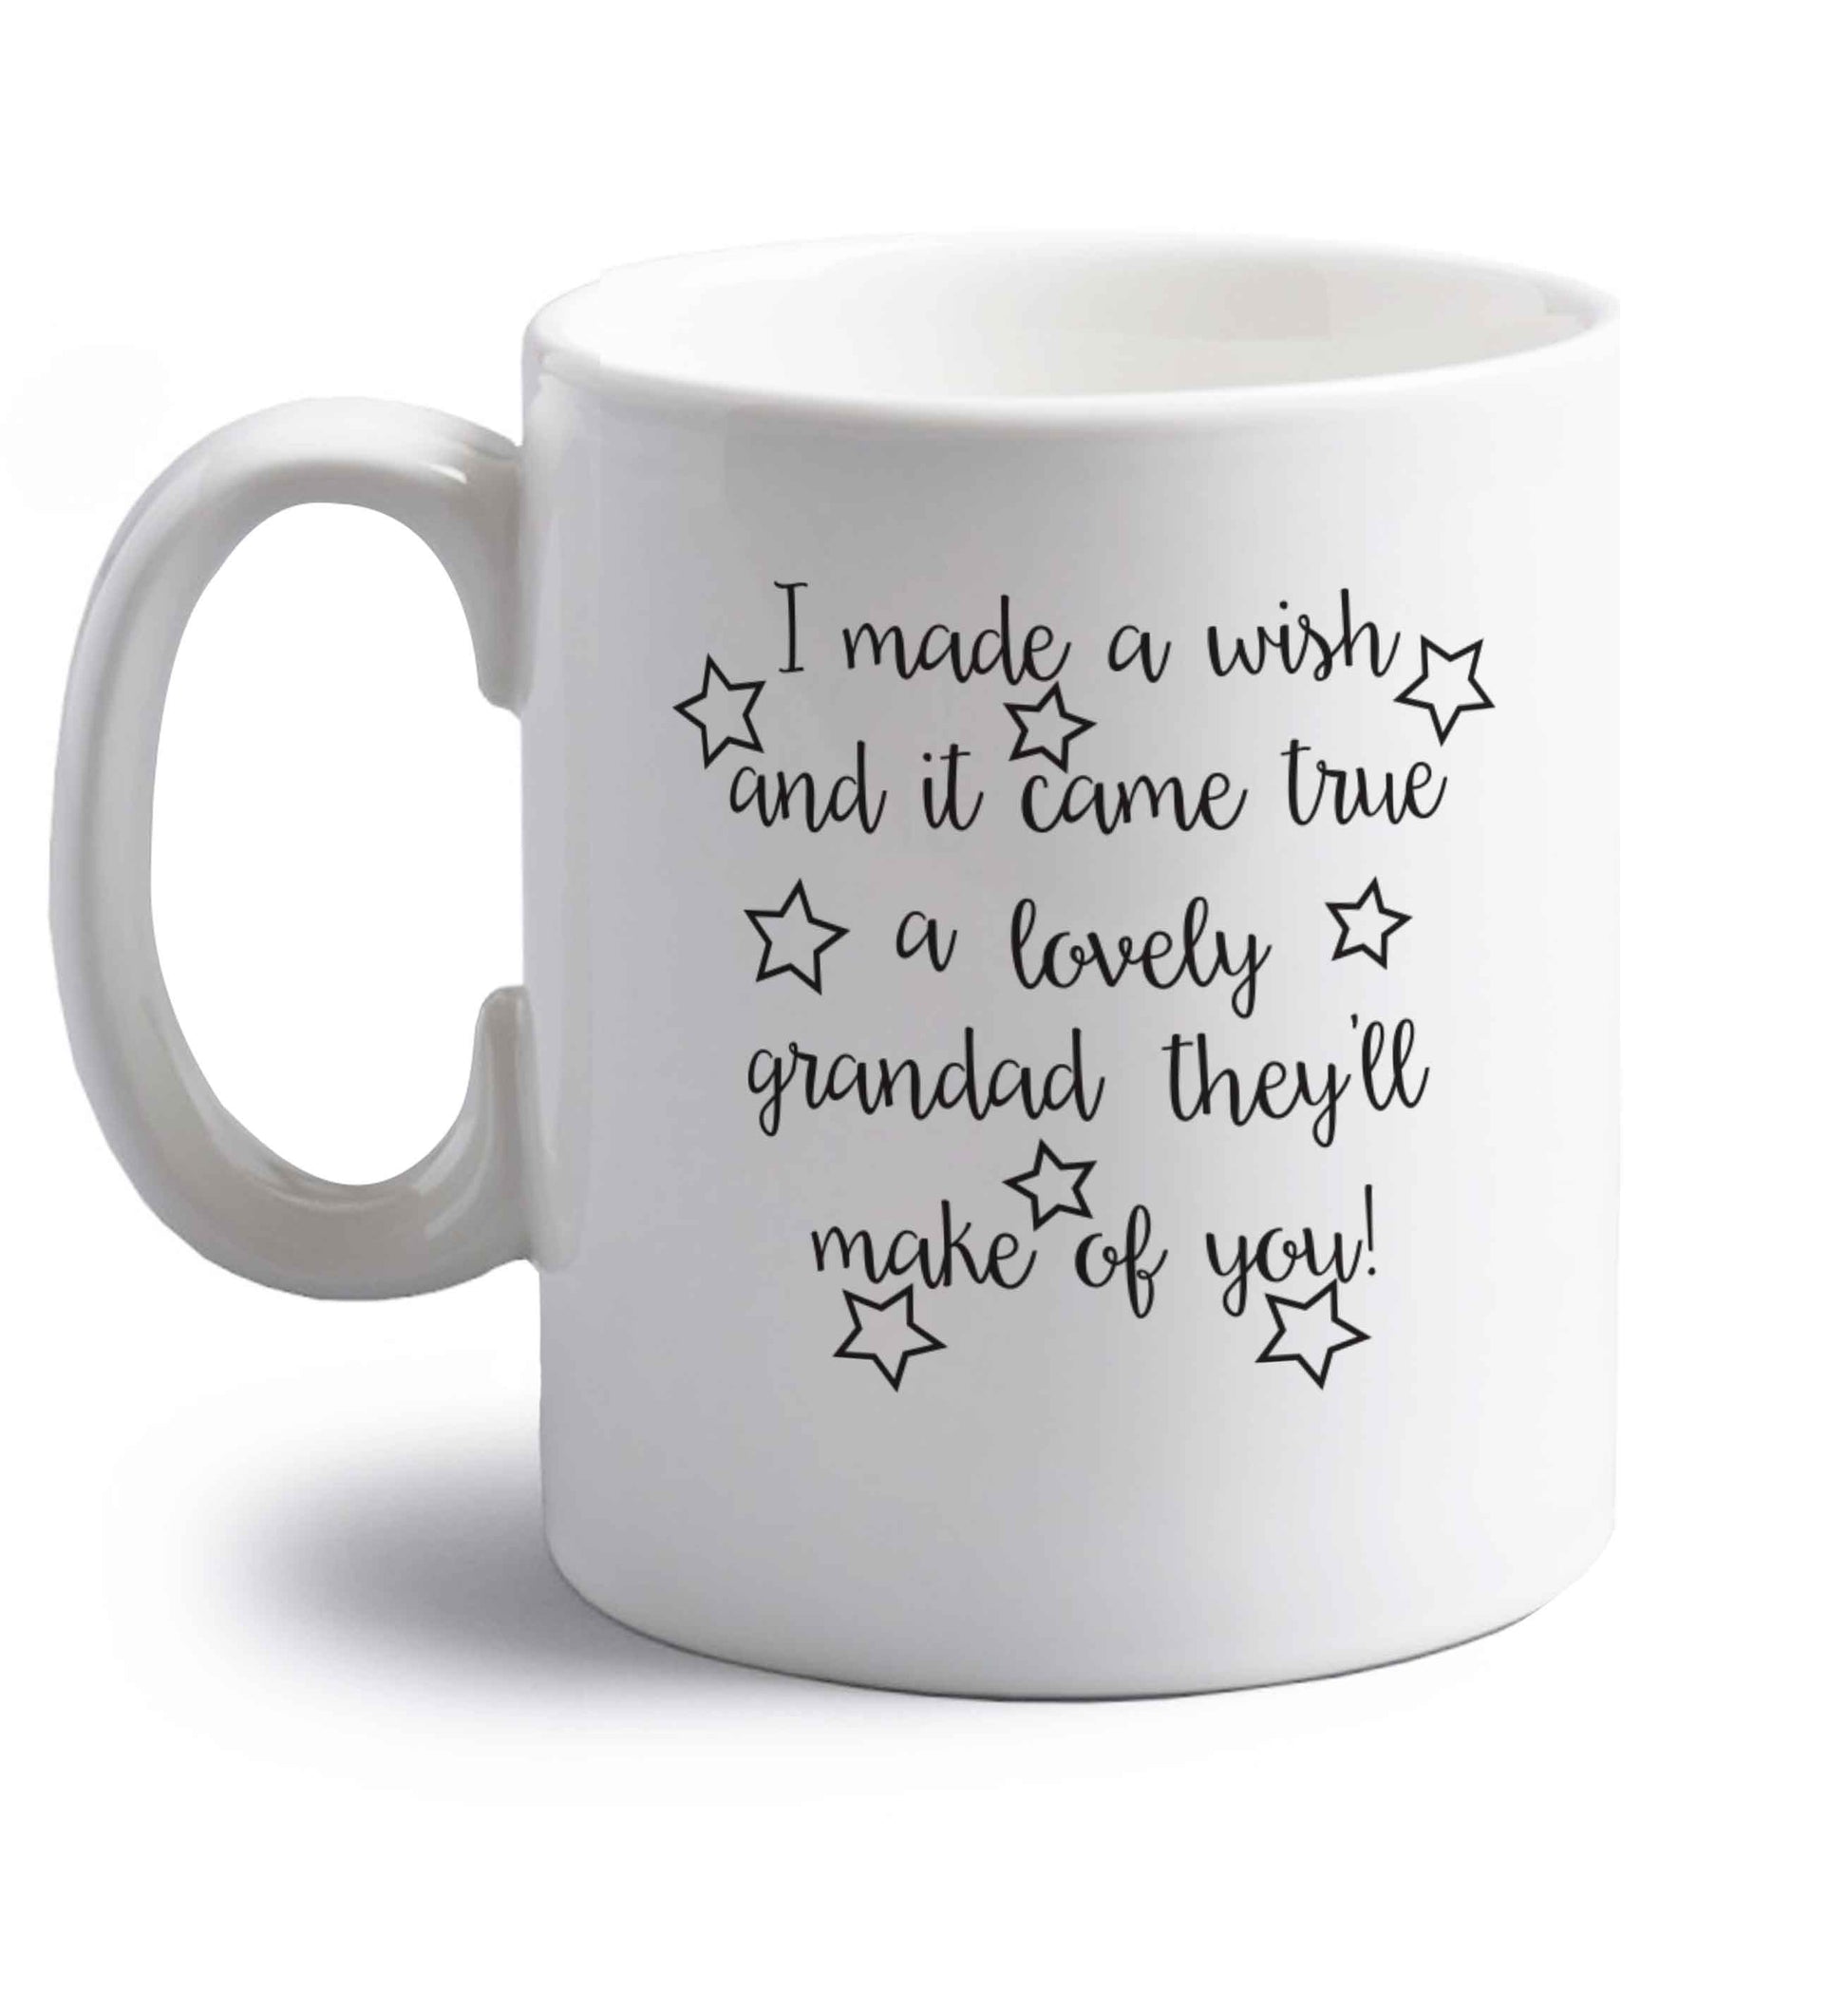 I made a wish and it came true a lovely grandad they'll make of you! right handed white ceramic mug 